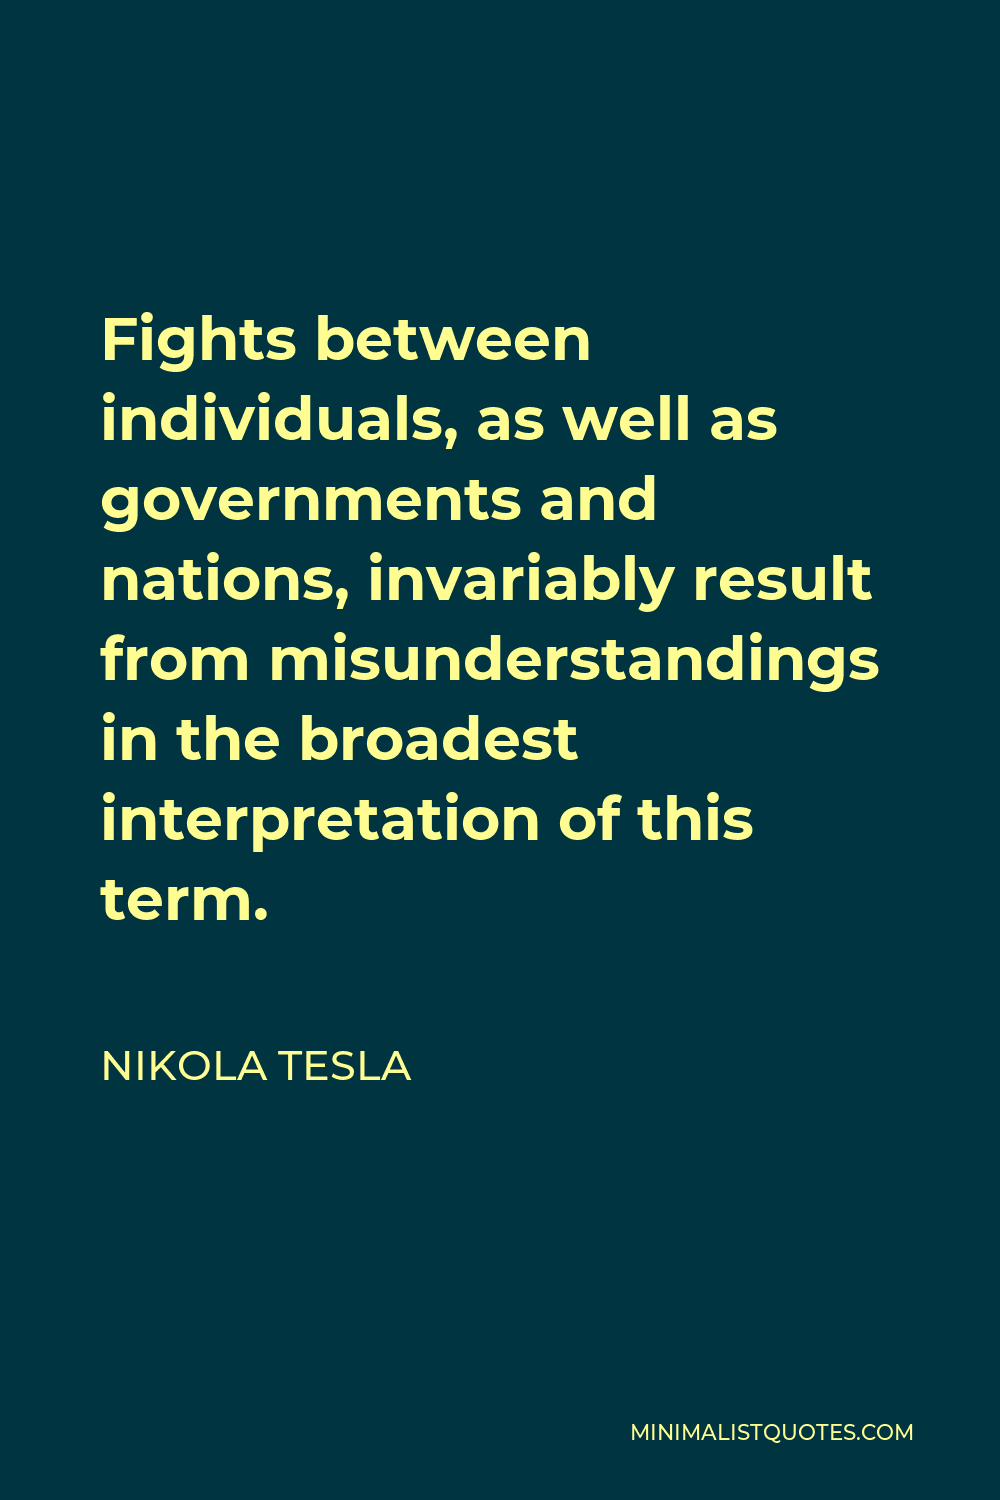 Nikola Tesla Quote - Fights between individuals, as well as governments and nations, invariably result from misunderstandings in the broadest interpretation of this term.